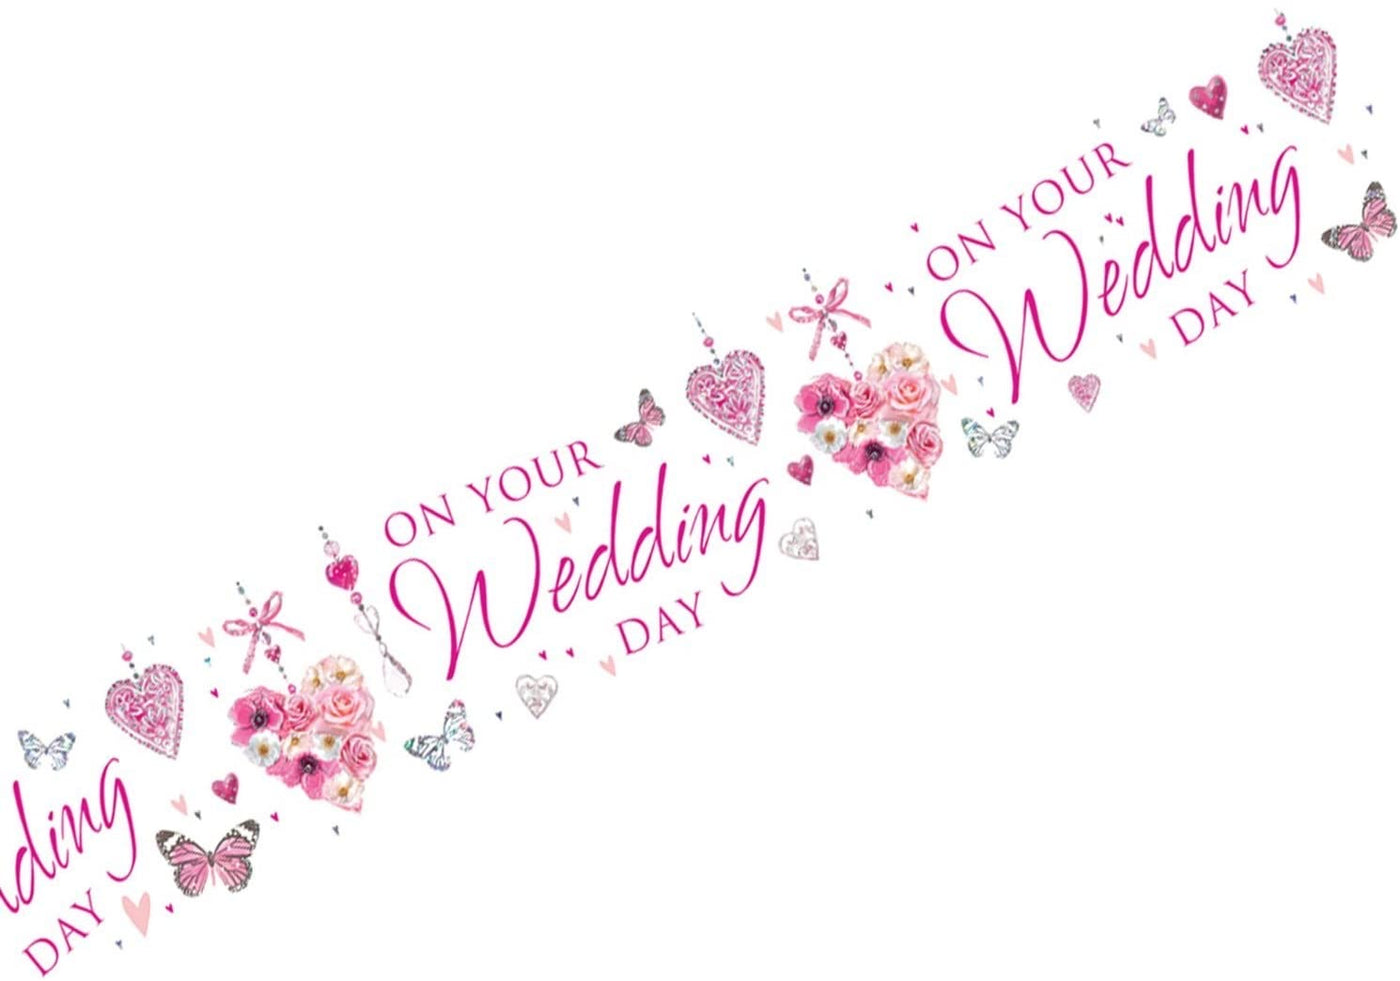 On Your Wedding Day Banner